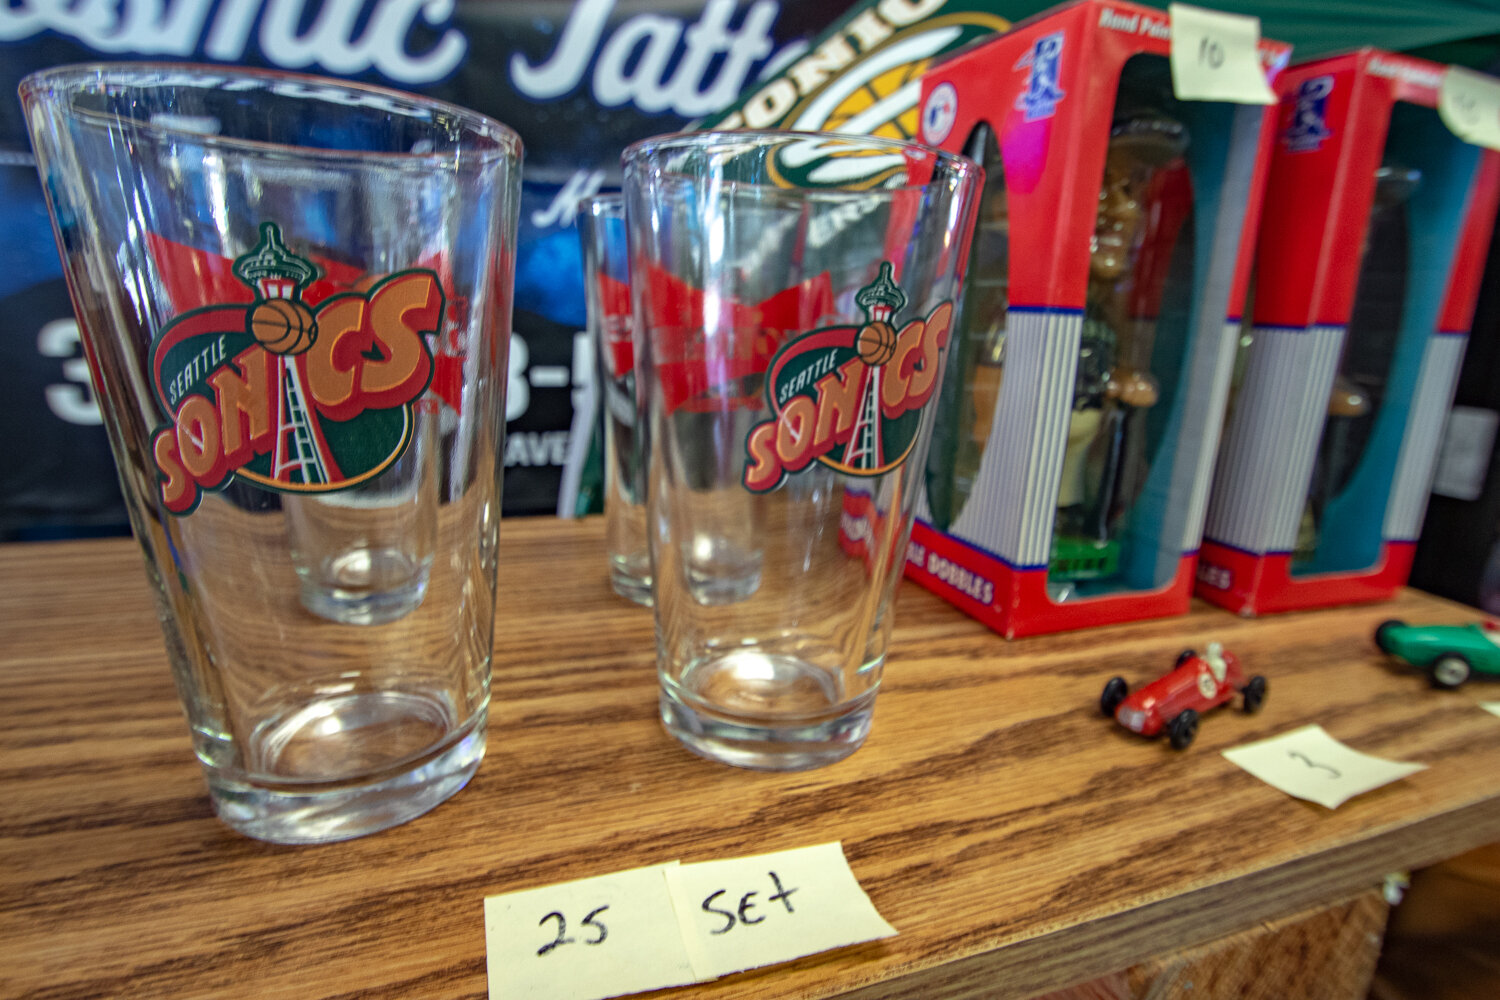 A set of Seattle Supersonics pint glasses sit on display at the Tower Mall at 320 N. Tower Ave. in Centralia during the inaugural Keiper's Cards and Memorabilia Show on Saturday, Sept. 2.